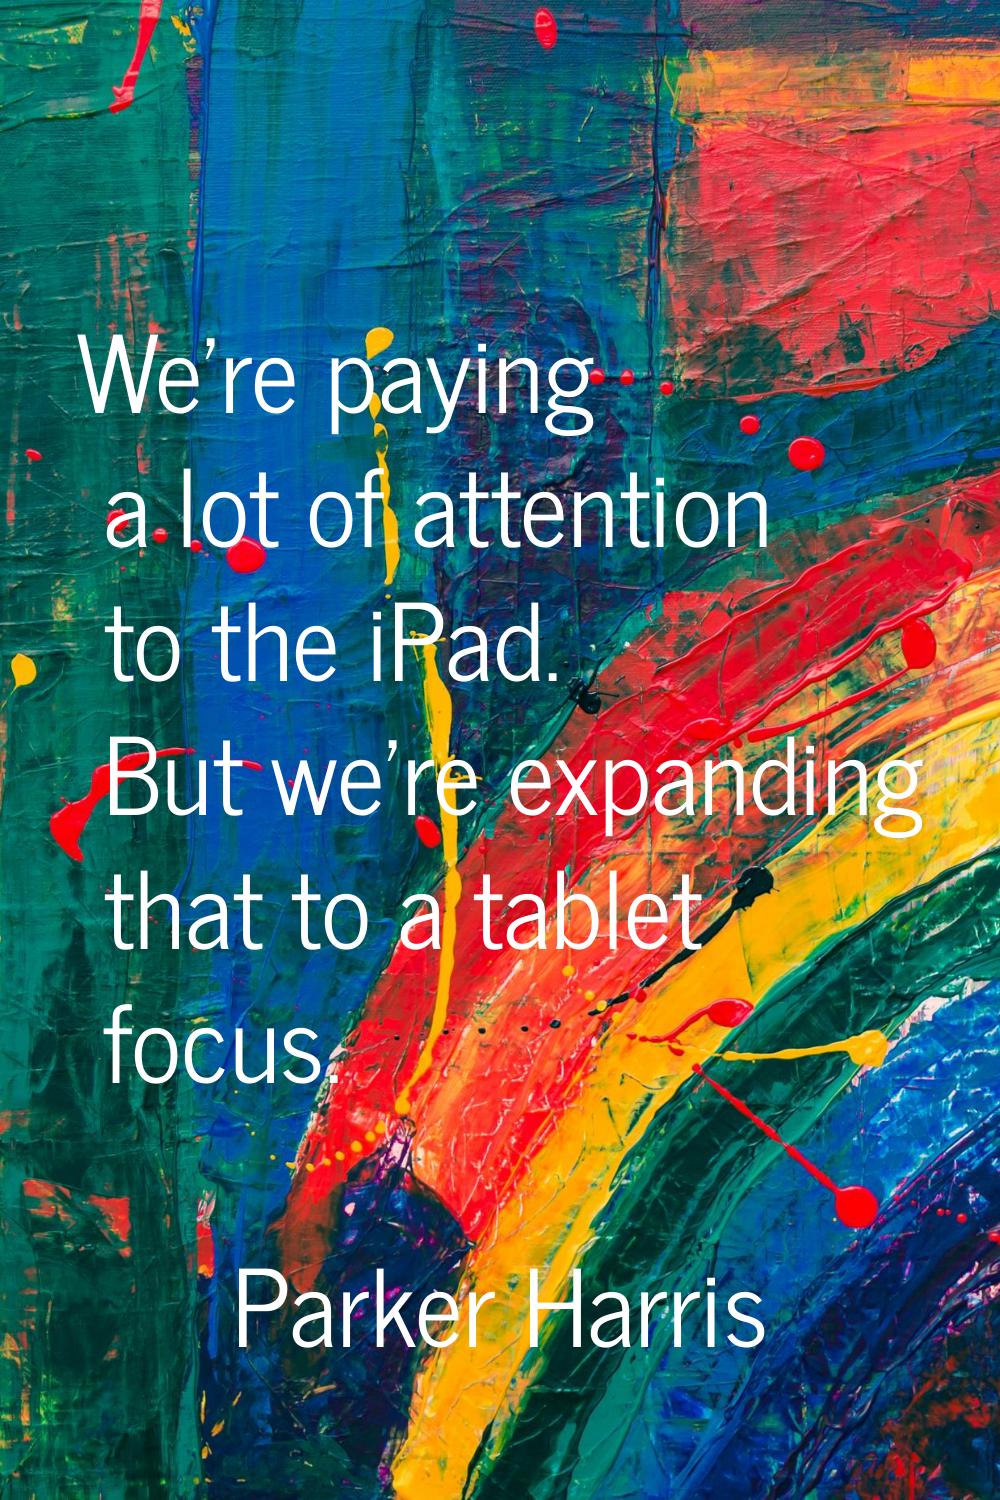 We're paying a lot of attention to the iPad. But we're expanding that to a tablet focus.